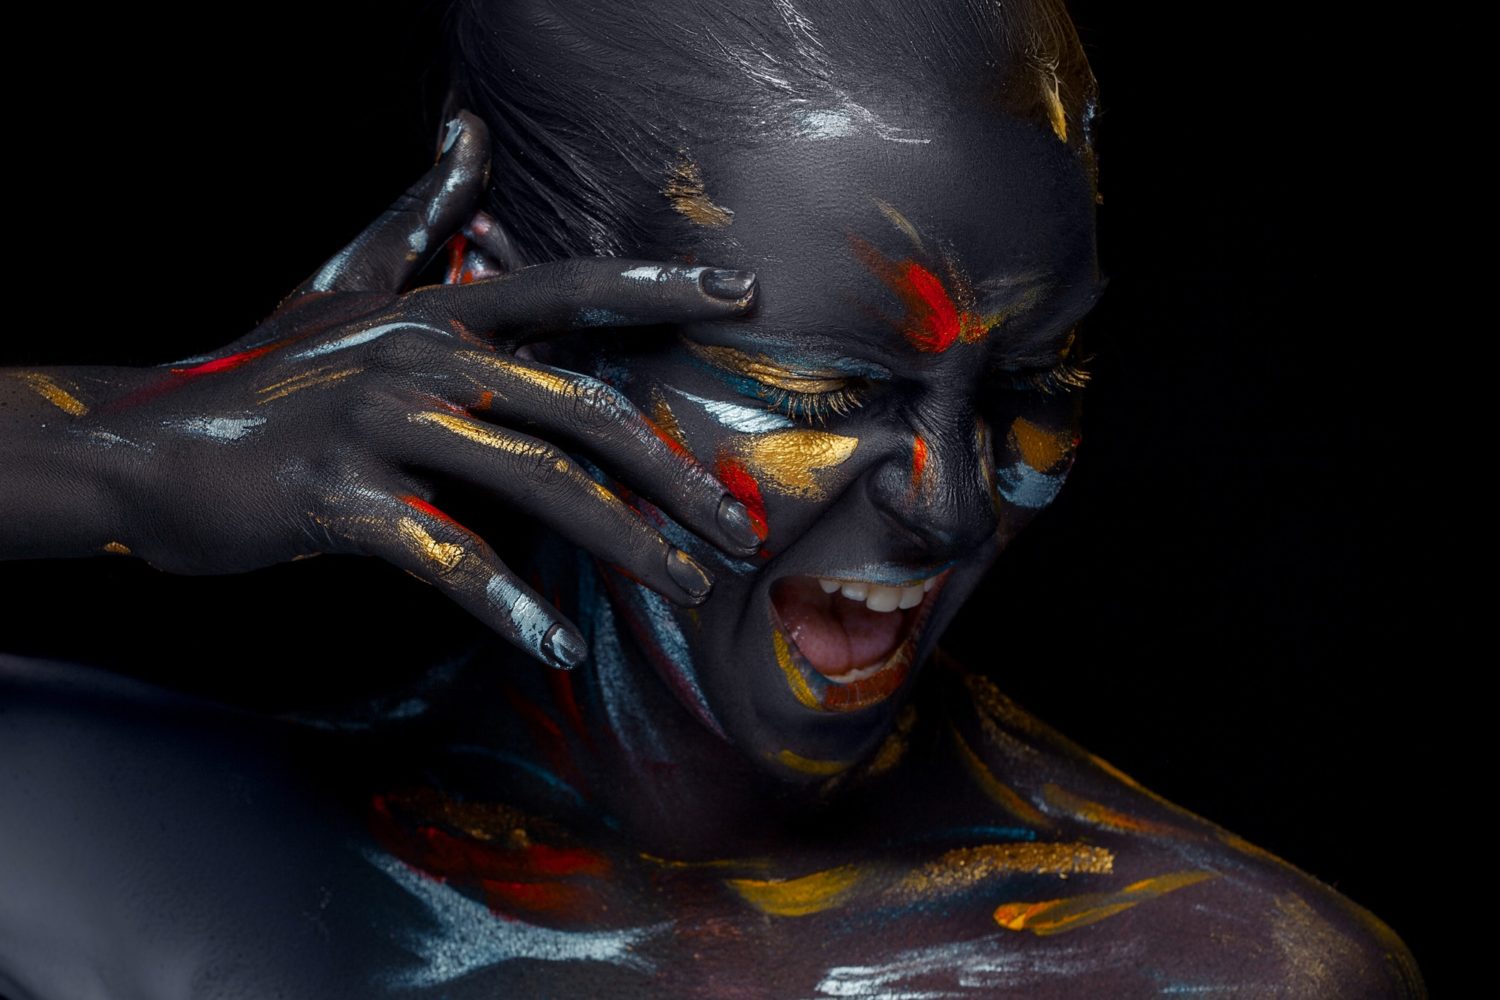 Portrait of a young woman who is posing covered with black paint